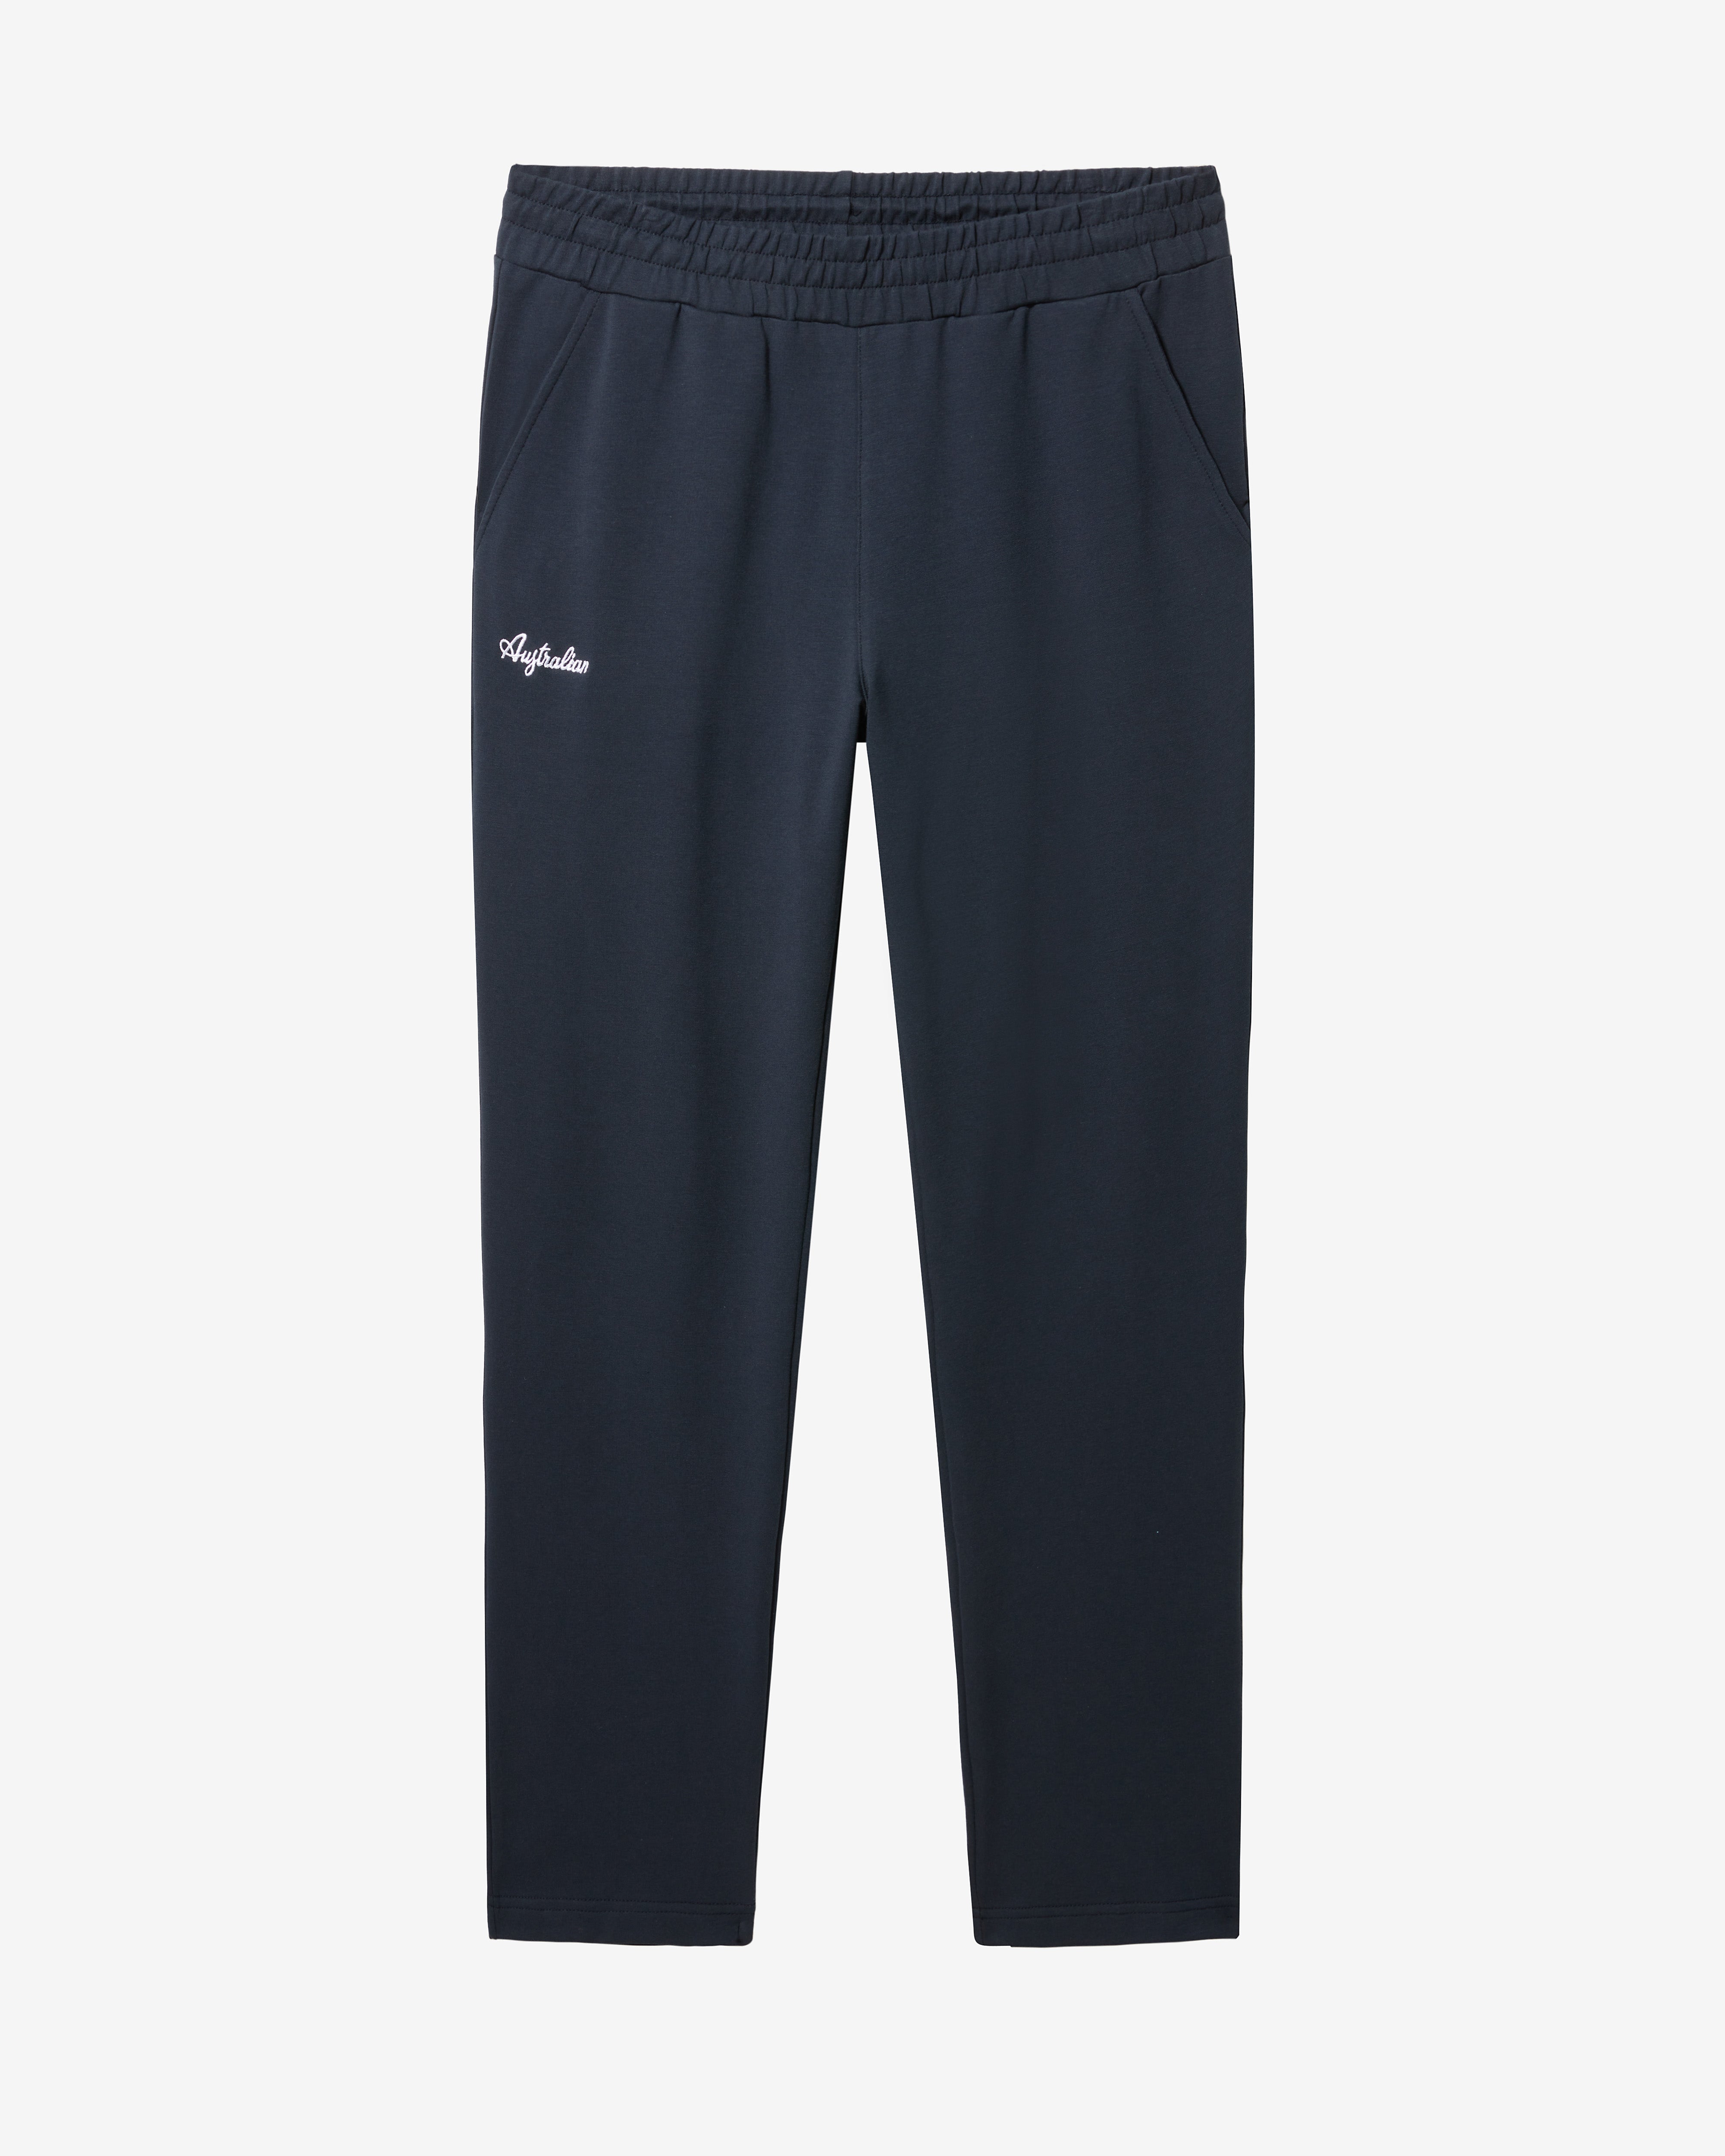 Nike x NOCTA NRG WOVEN TRACK PANT | FN7668-200 | AFEW STORE